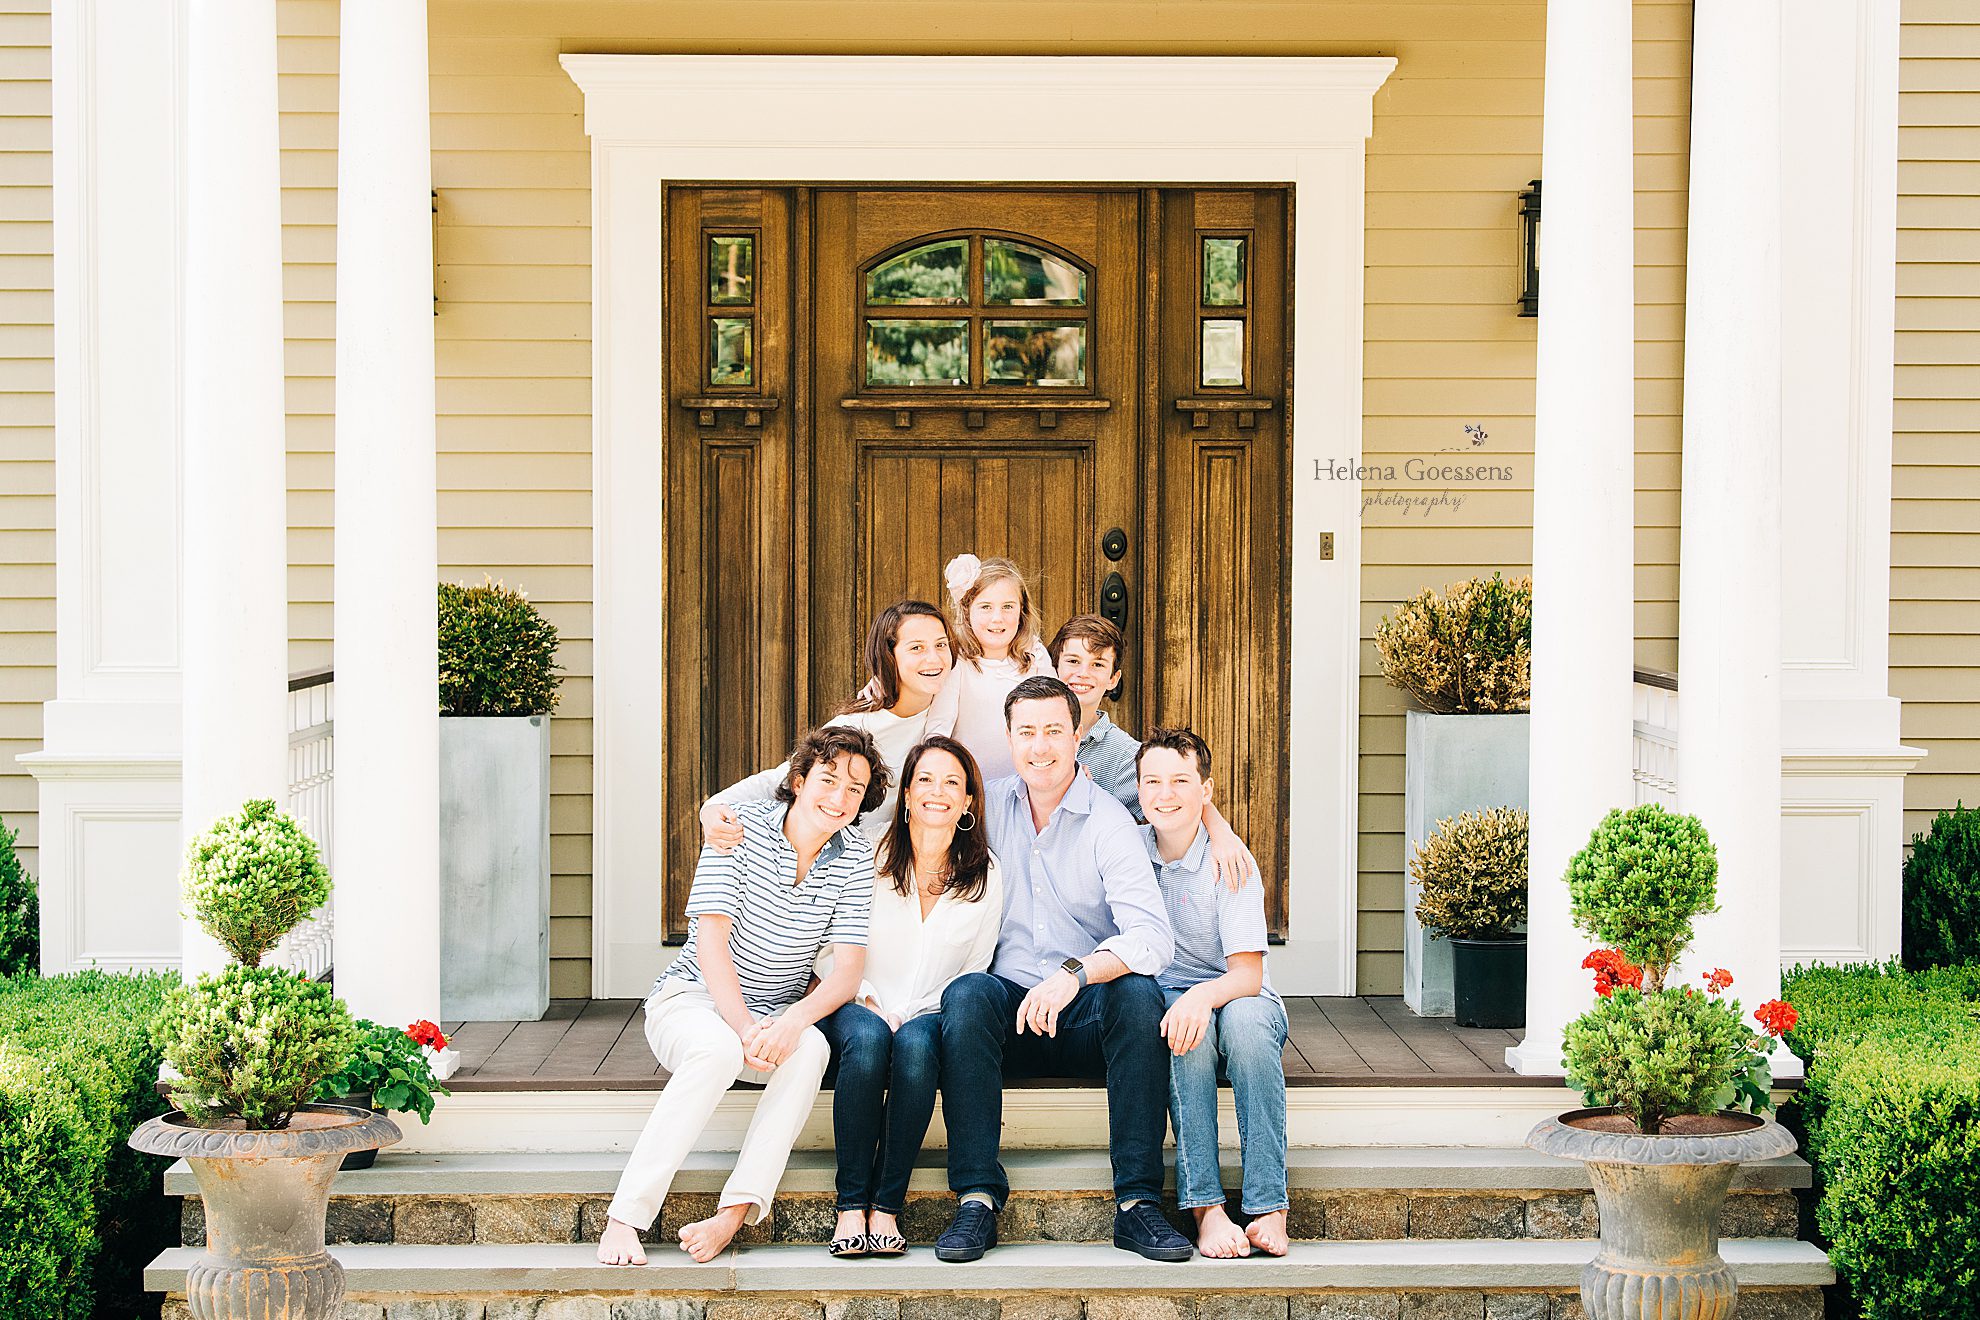 Helena Goessens Photography and families raise money for Brigham and Women's Hospital through Front Steps Project